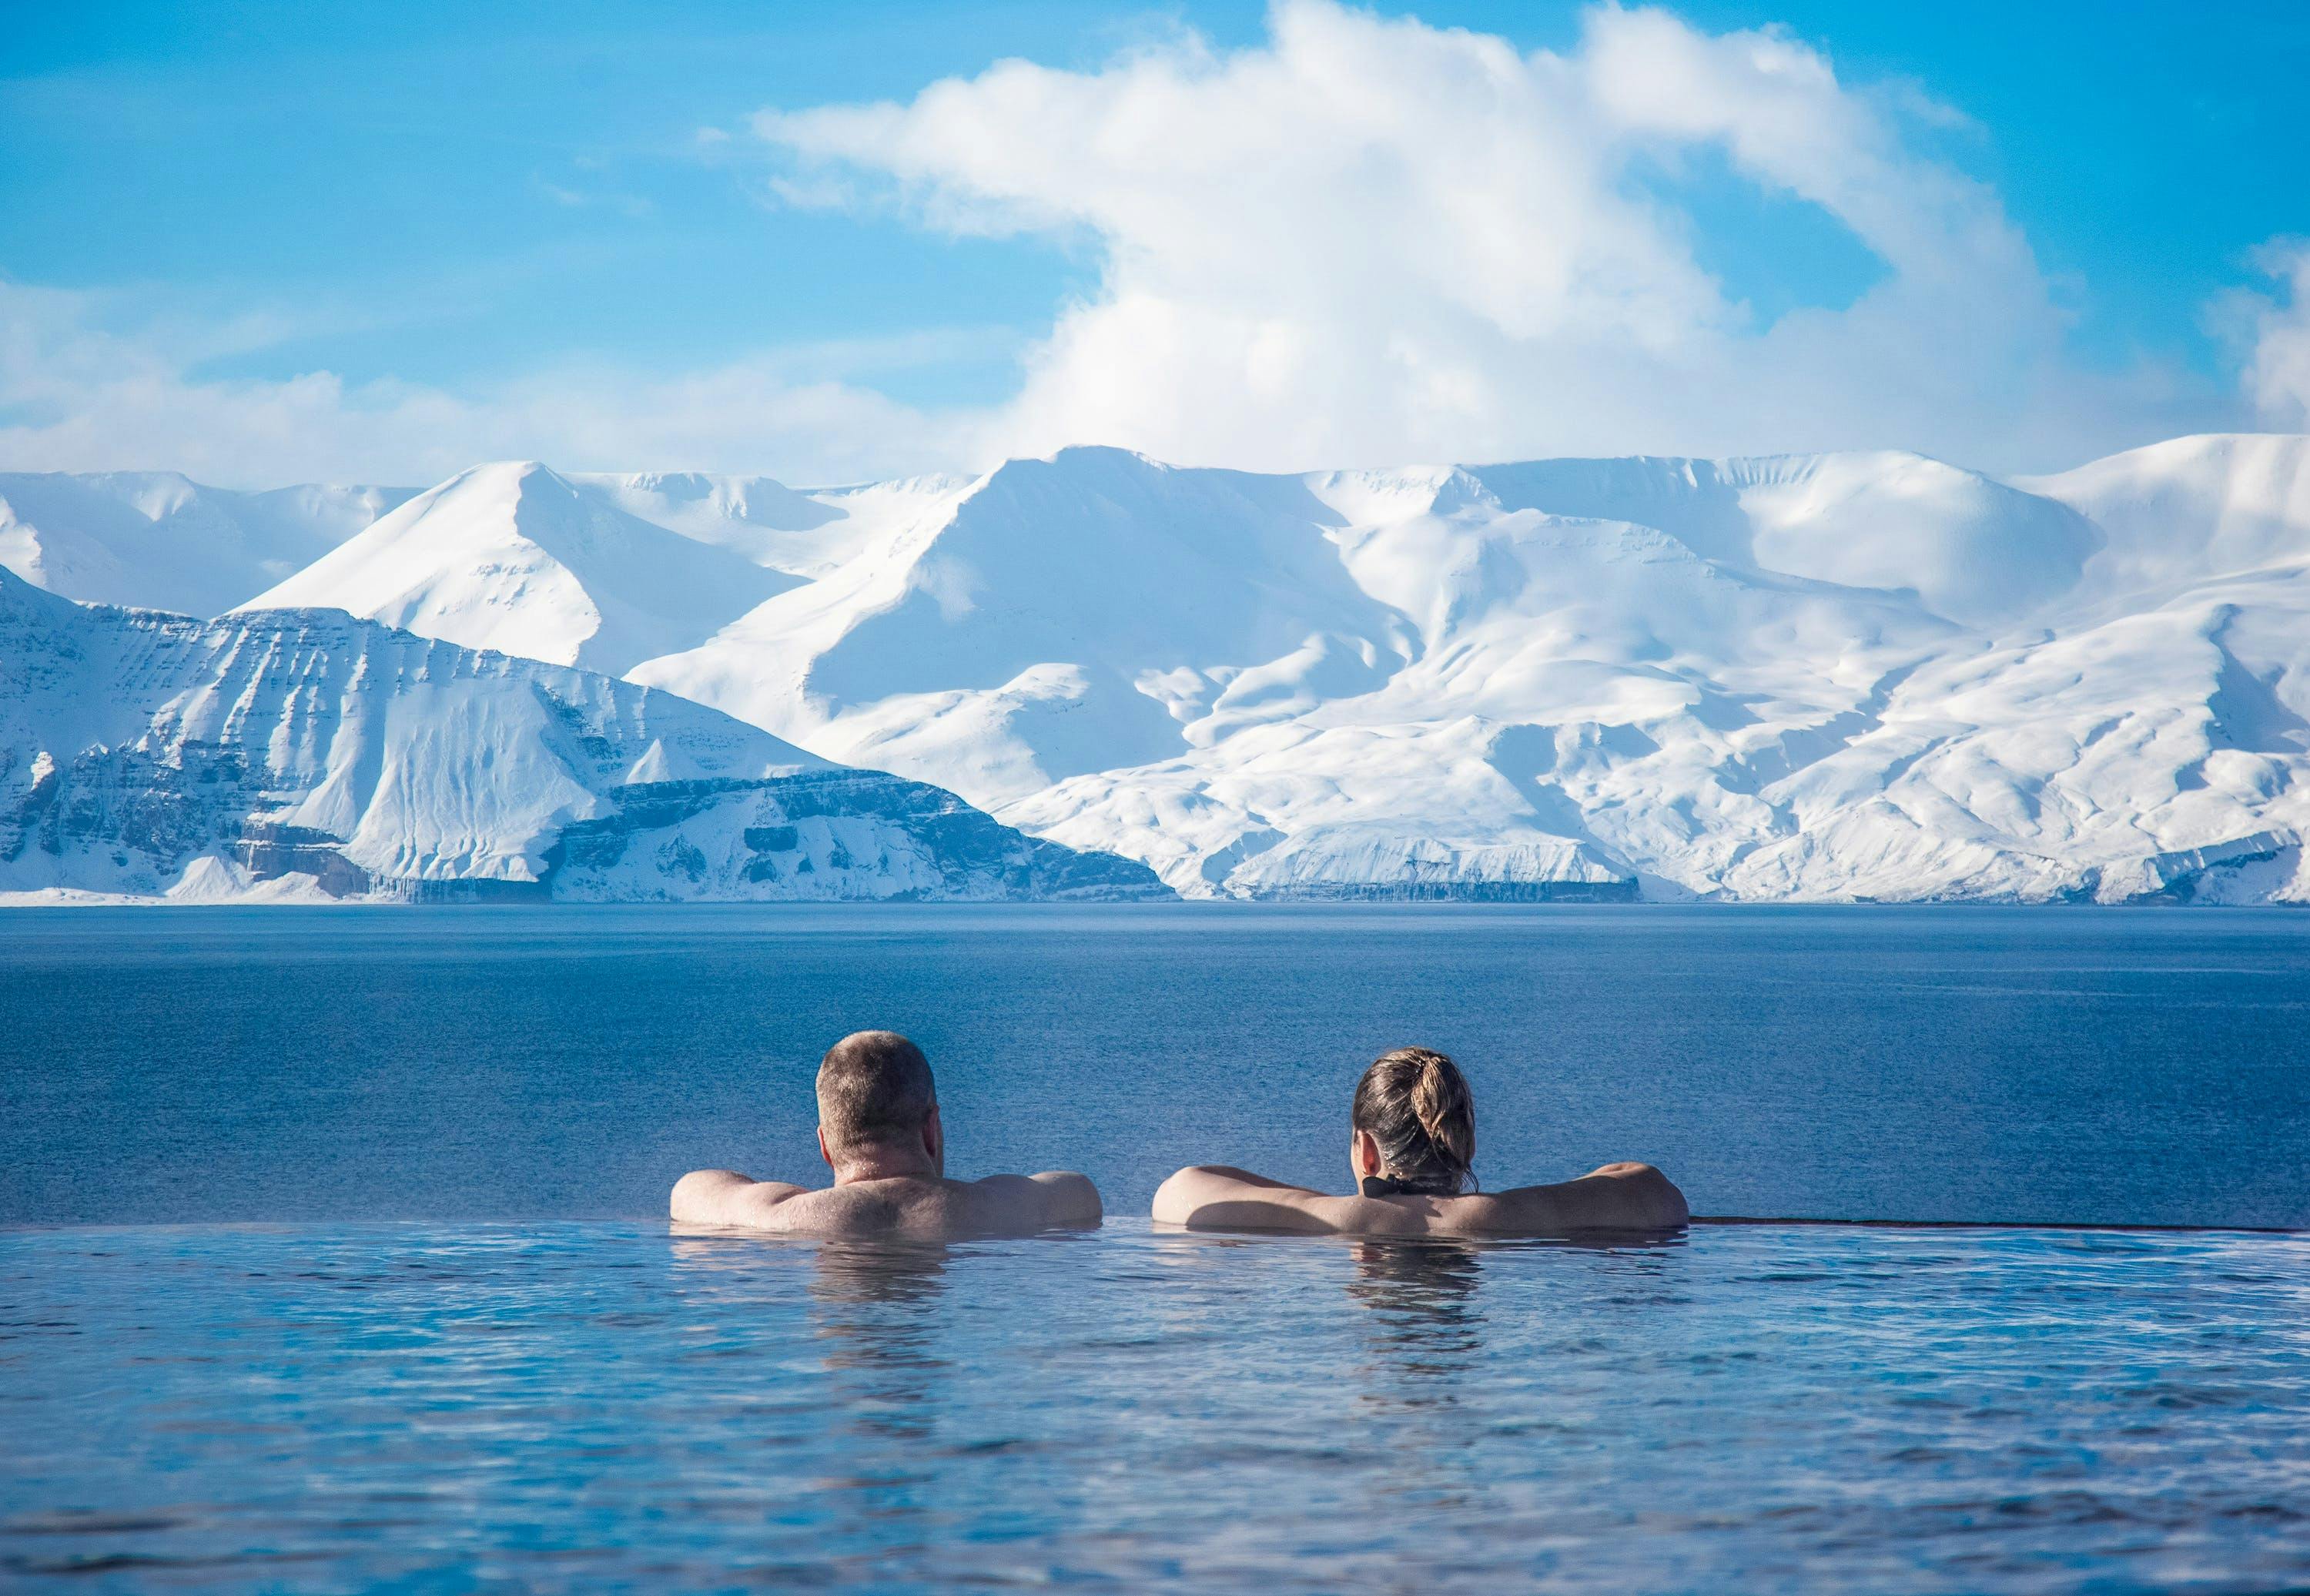 A couple beople bathing and facing snowy mountains